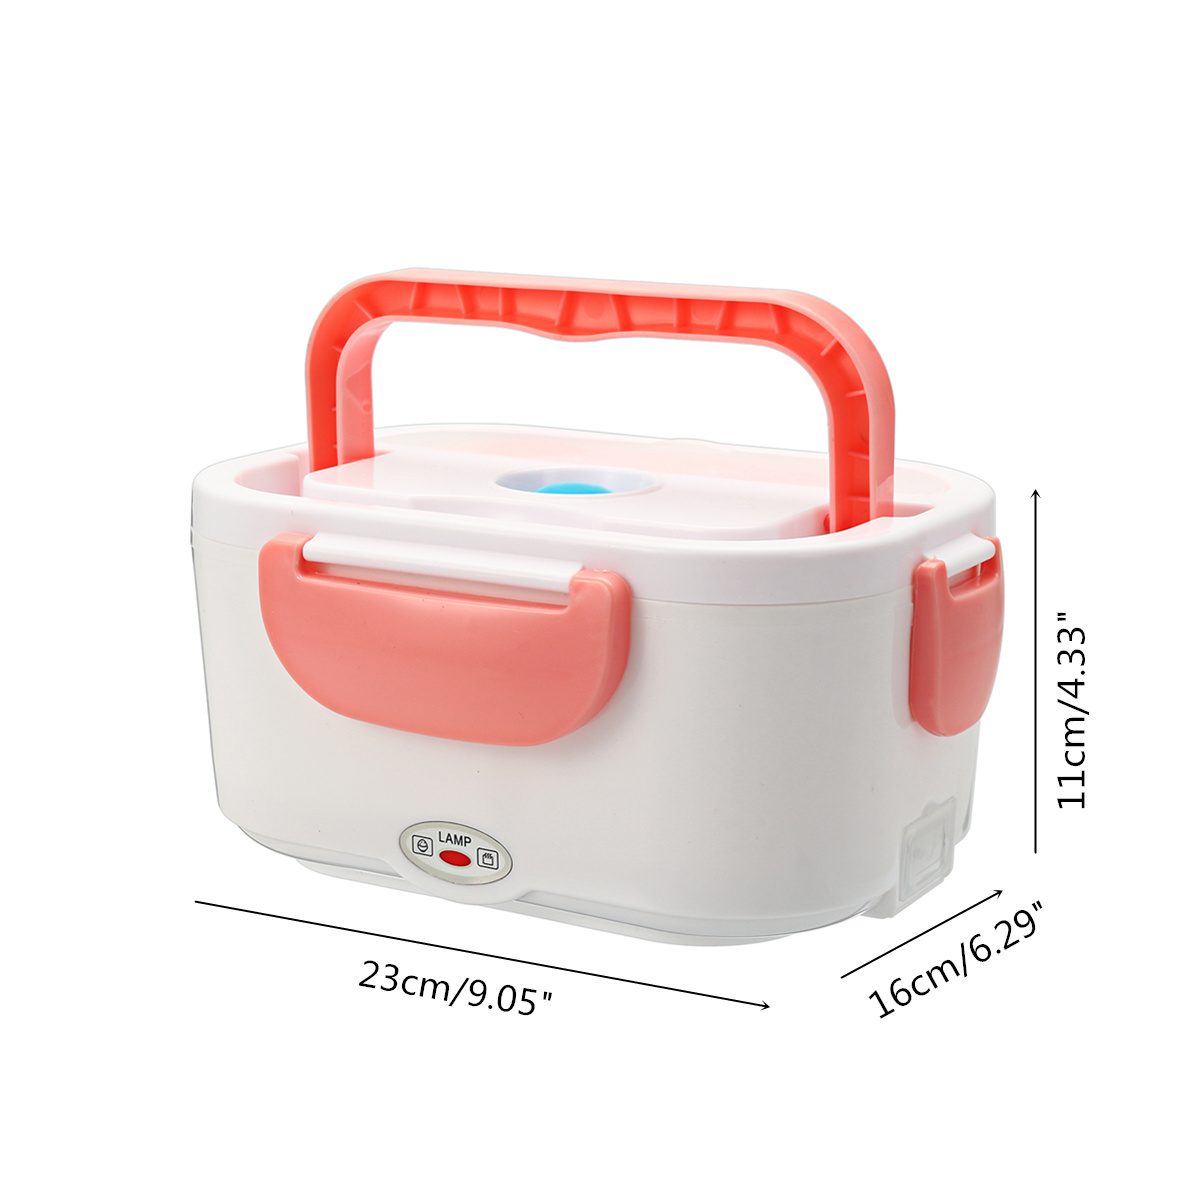 110V-Portable-Electric-Lunch-Box-Steamer-Rice-Cooker-Container-Heat-Preservation-1400151-12